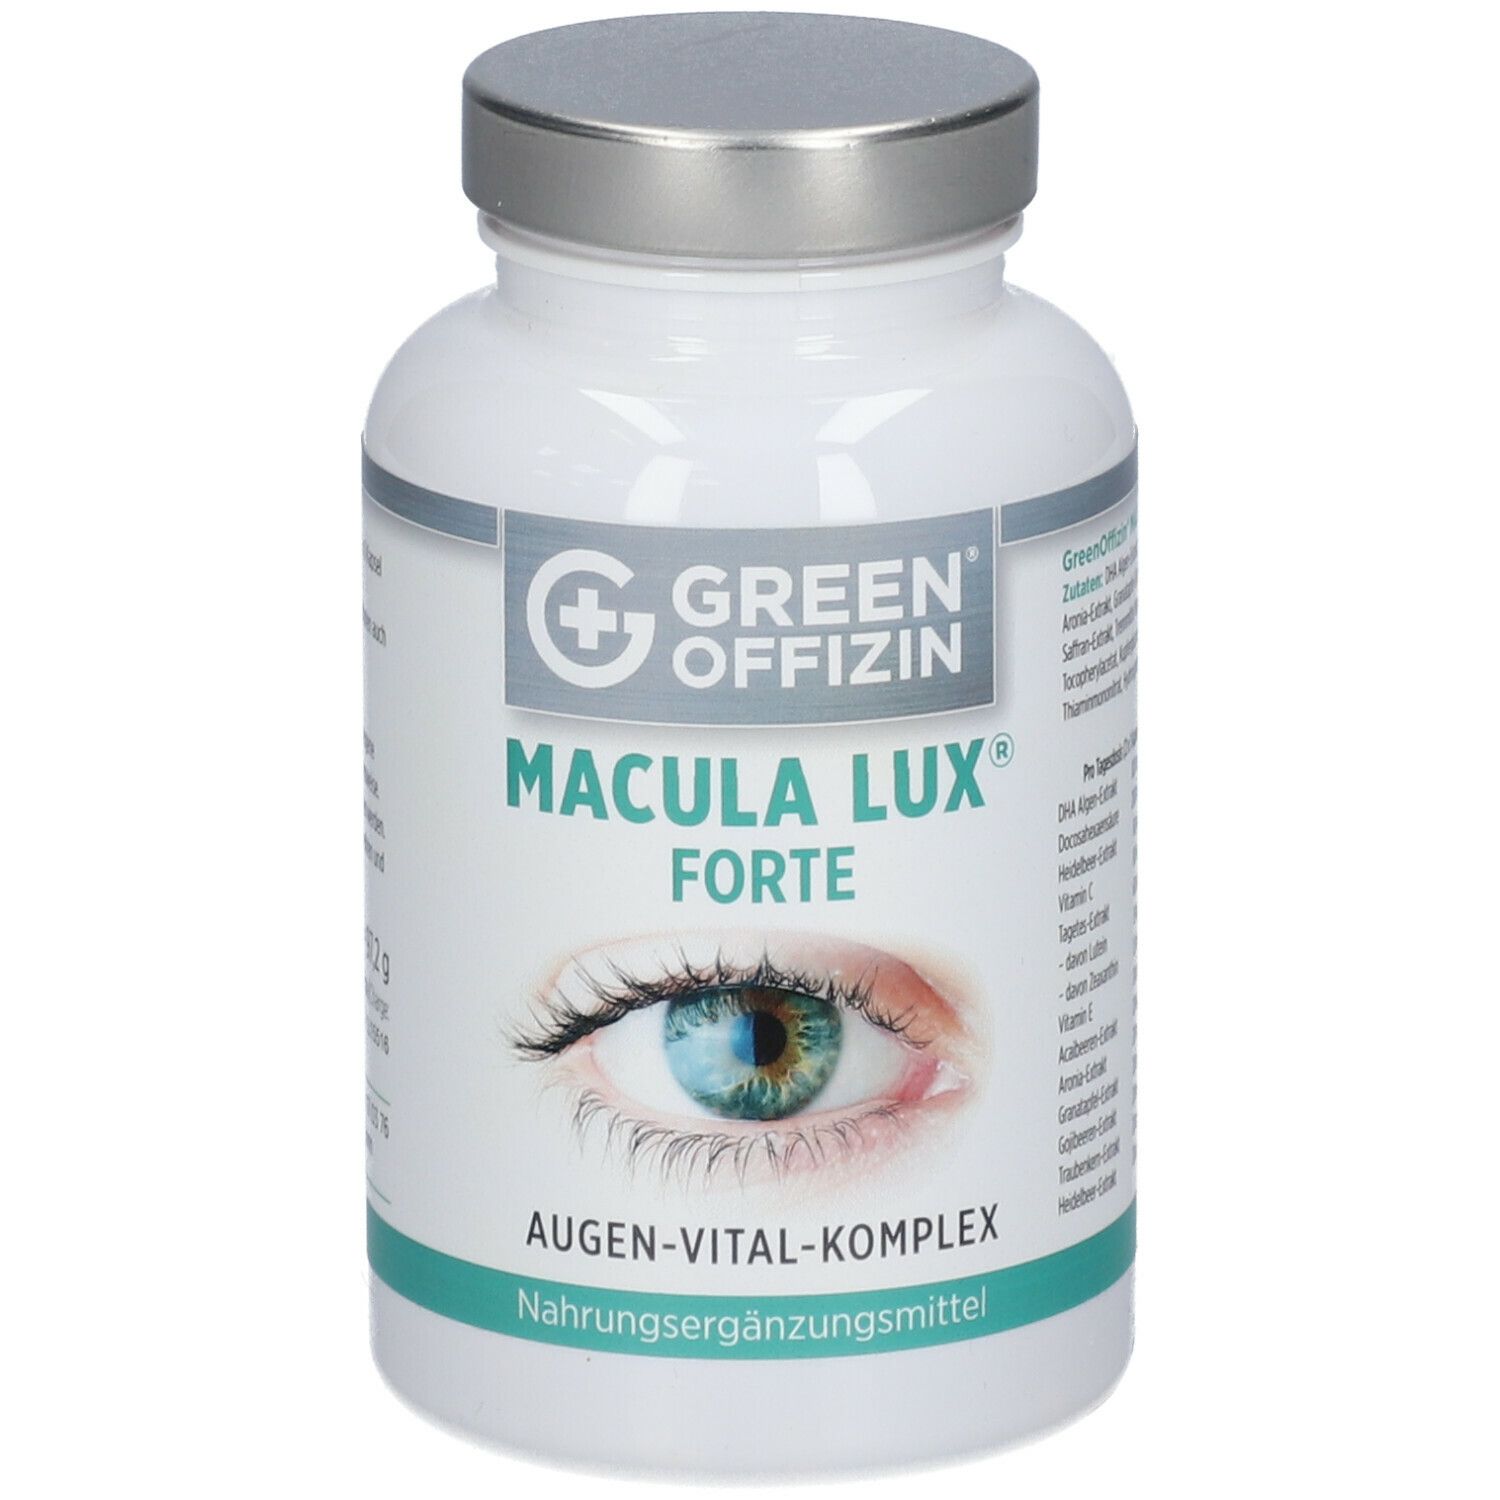 Macula Lux® Forte